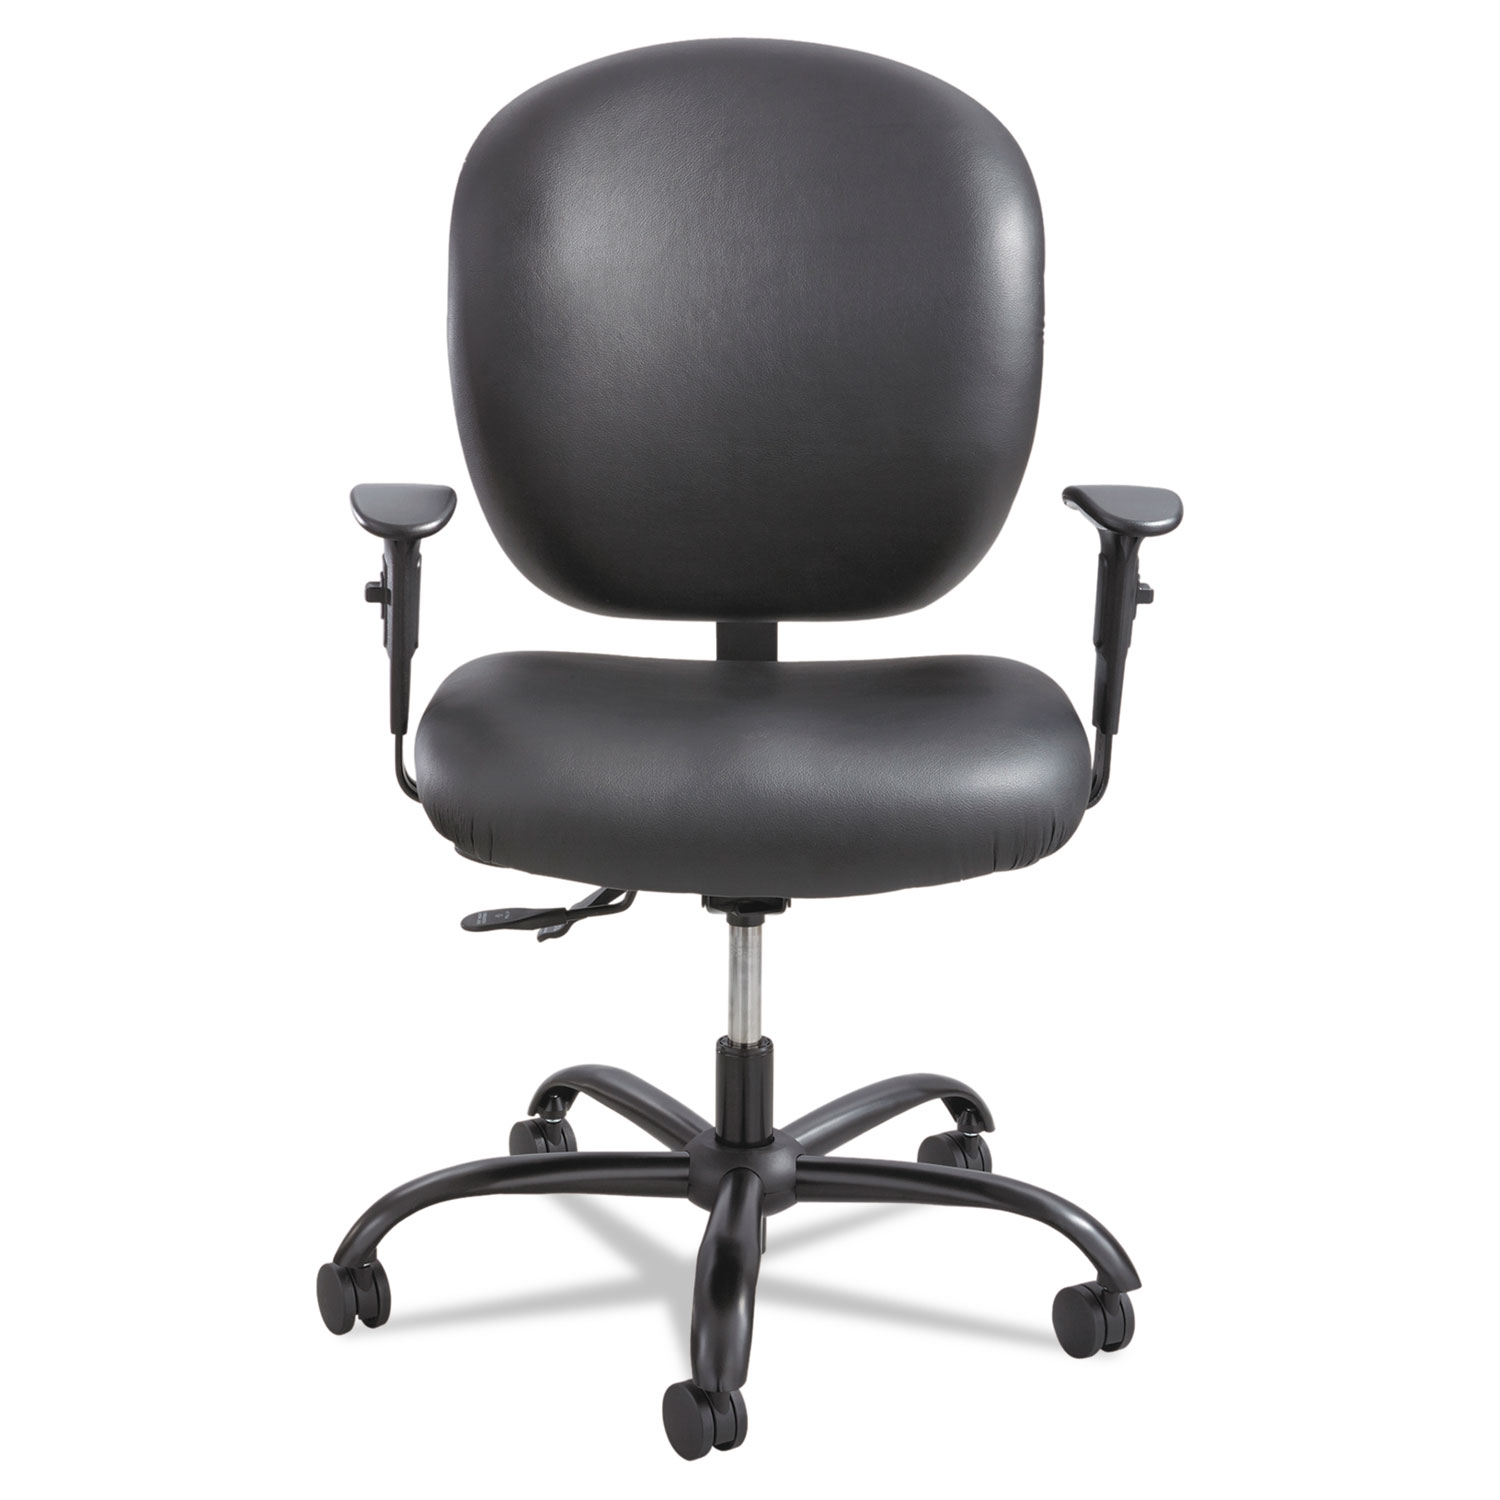  Safco 3391BV Alday Intensive-Use Chair, Supports up to 500 lbs., Black Seat/Black Back, Black Base (SAF3391BV) 